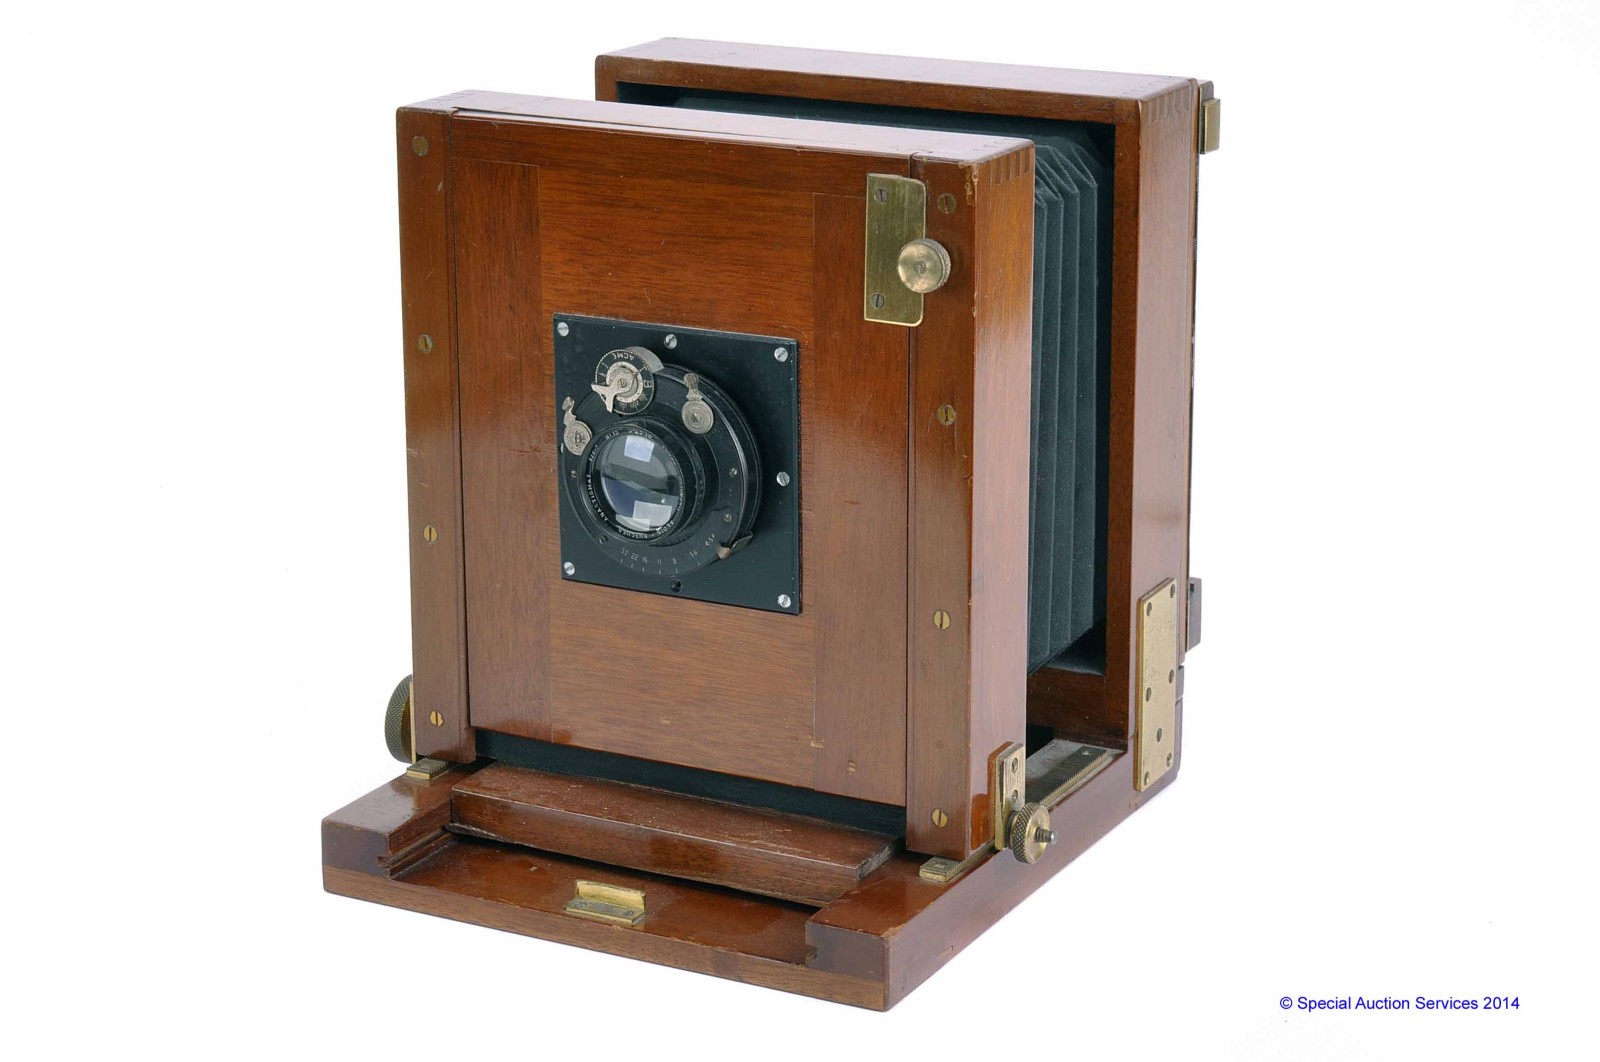 A Mahogany and Brass Prison Camera, unmarked but similar to those made by Gandolfi, two-position